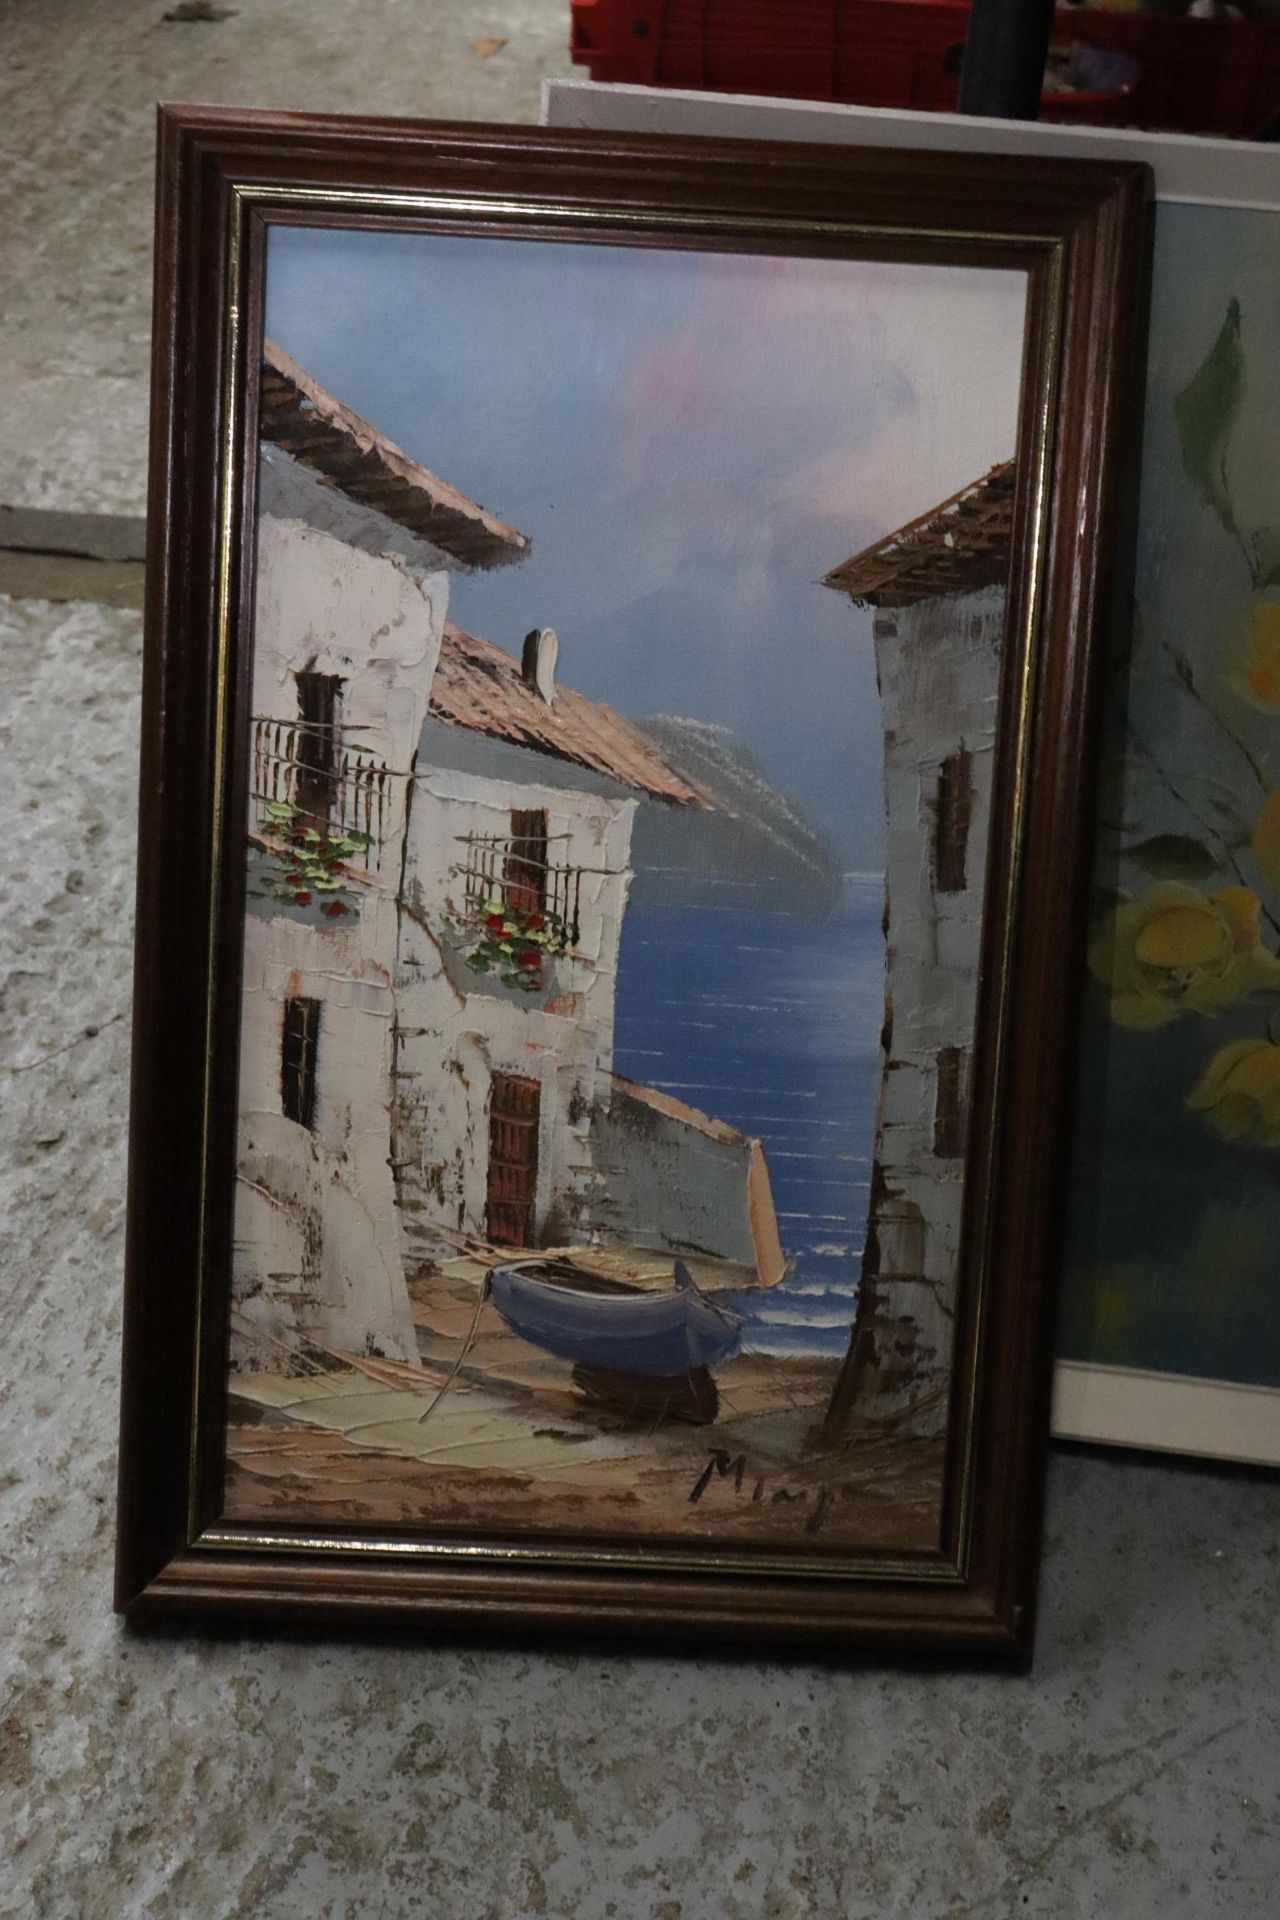 AN OIL ON BOARD OF A ROSE BOWL WITH ROSES, A CONTINENTAL SCENE AND A PRINT OF A STREET SCENE - Image 3 of 5